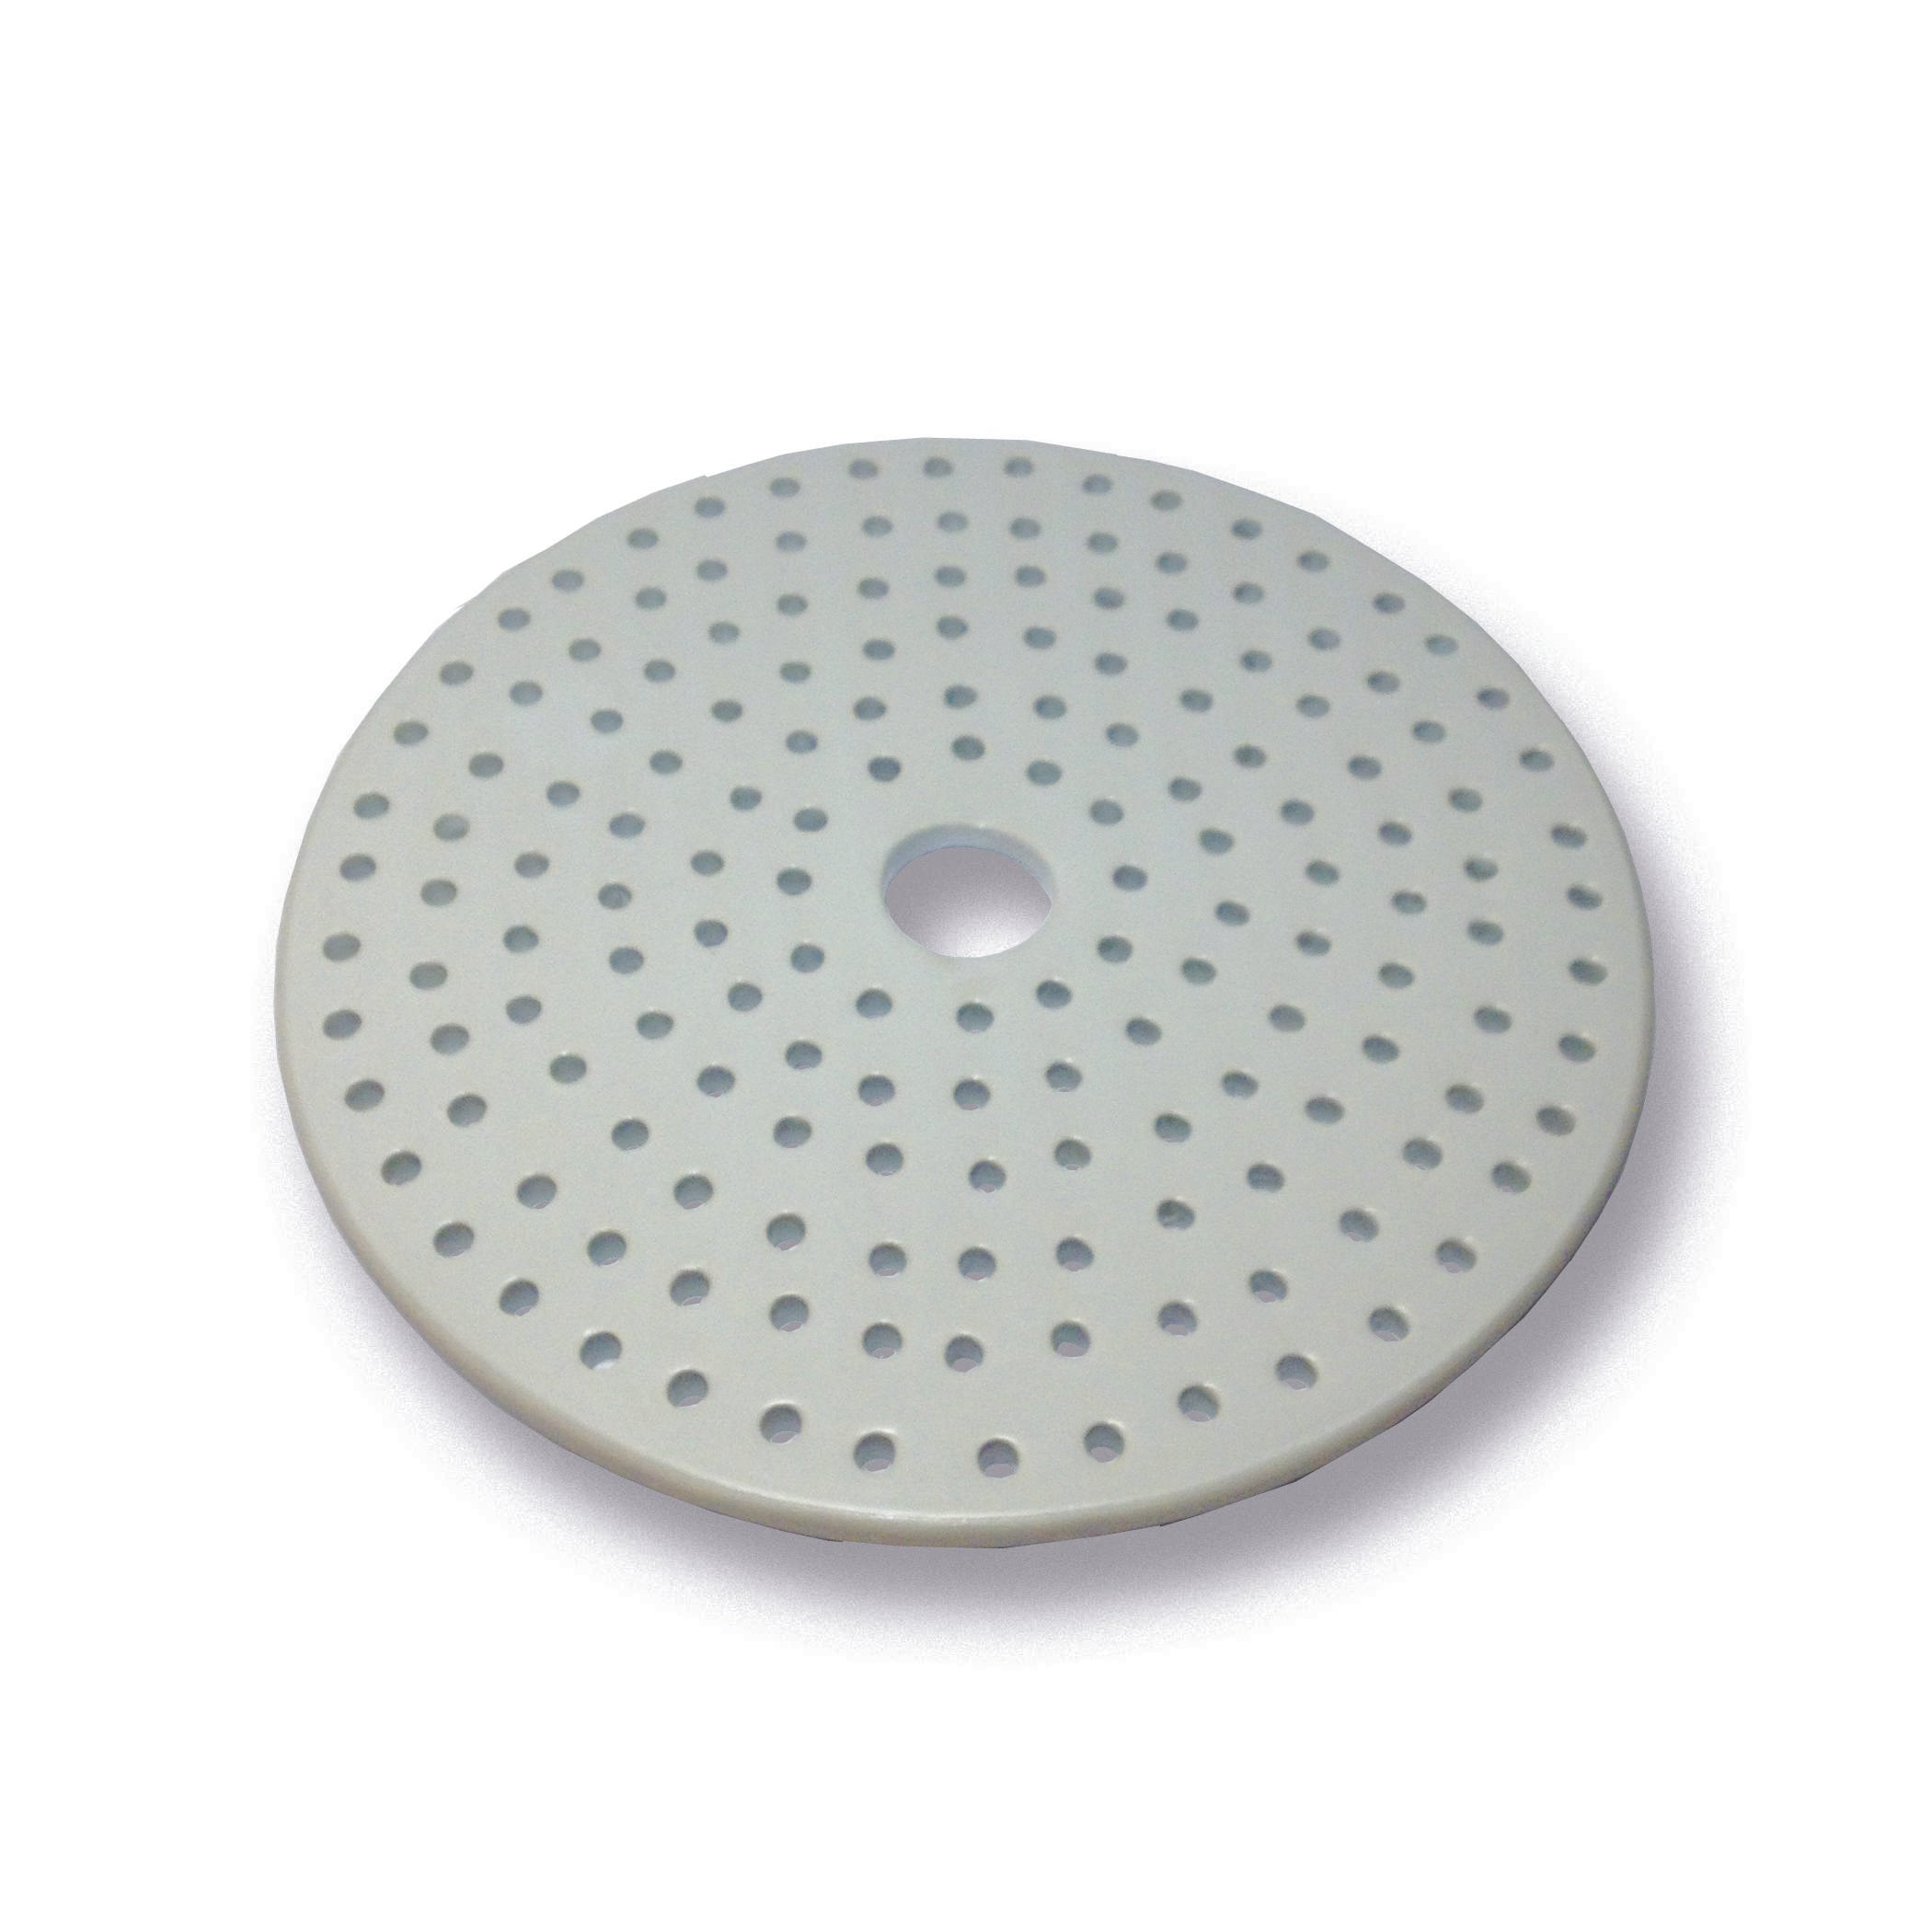 Desiccator Plates with Small Holes, Porcelain